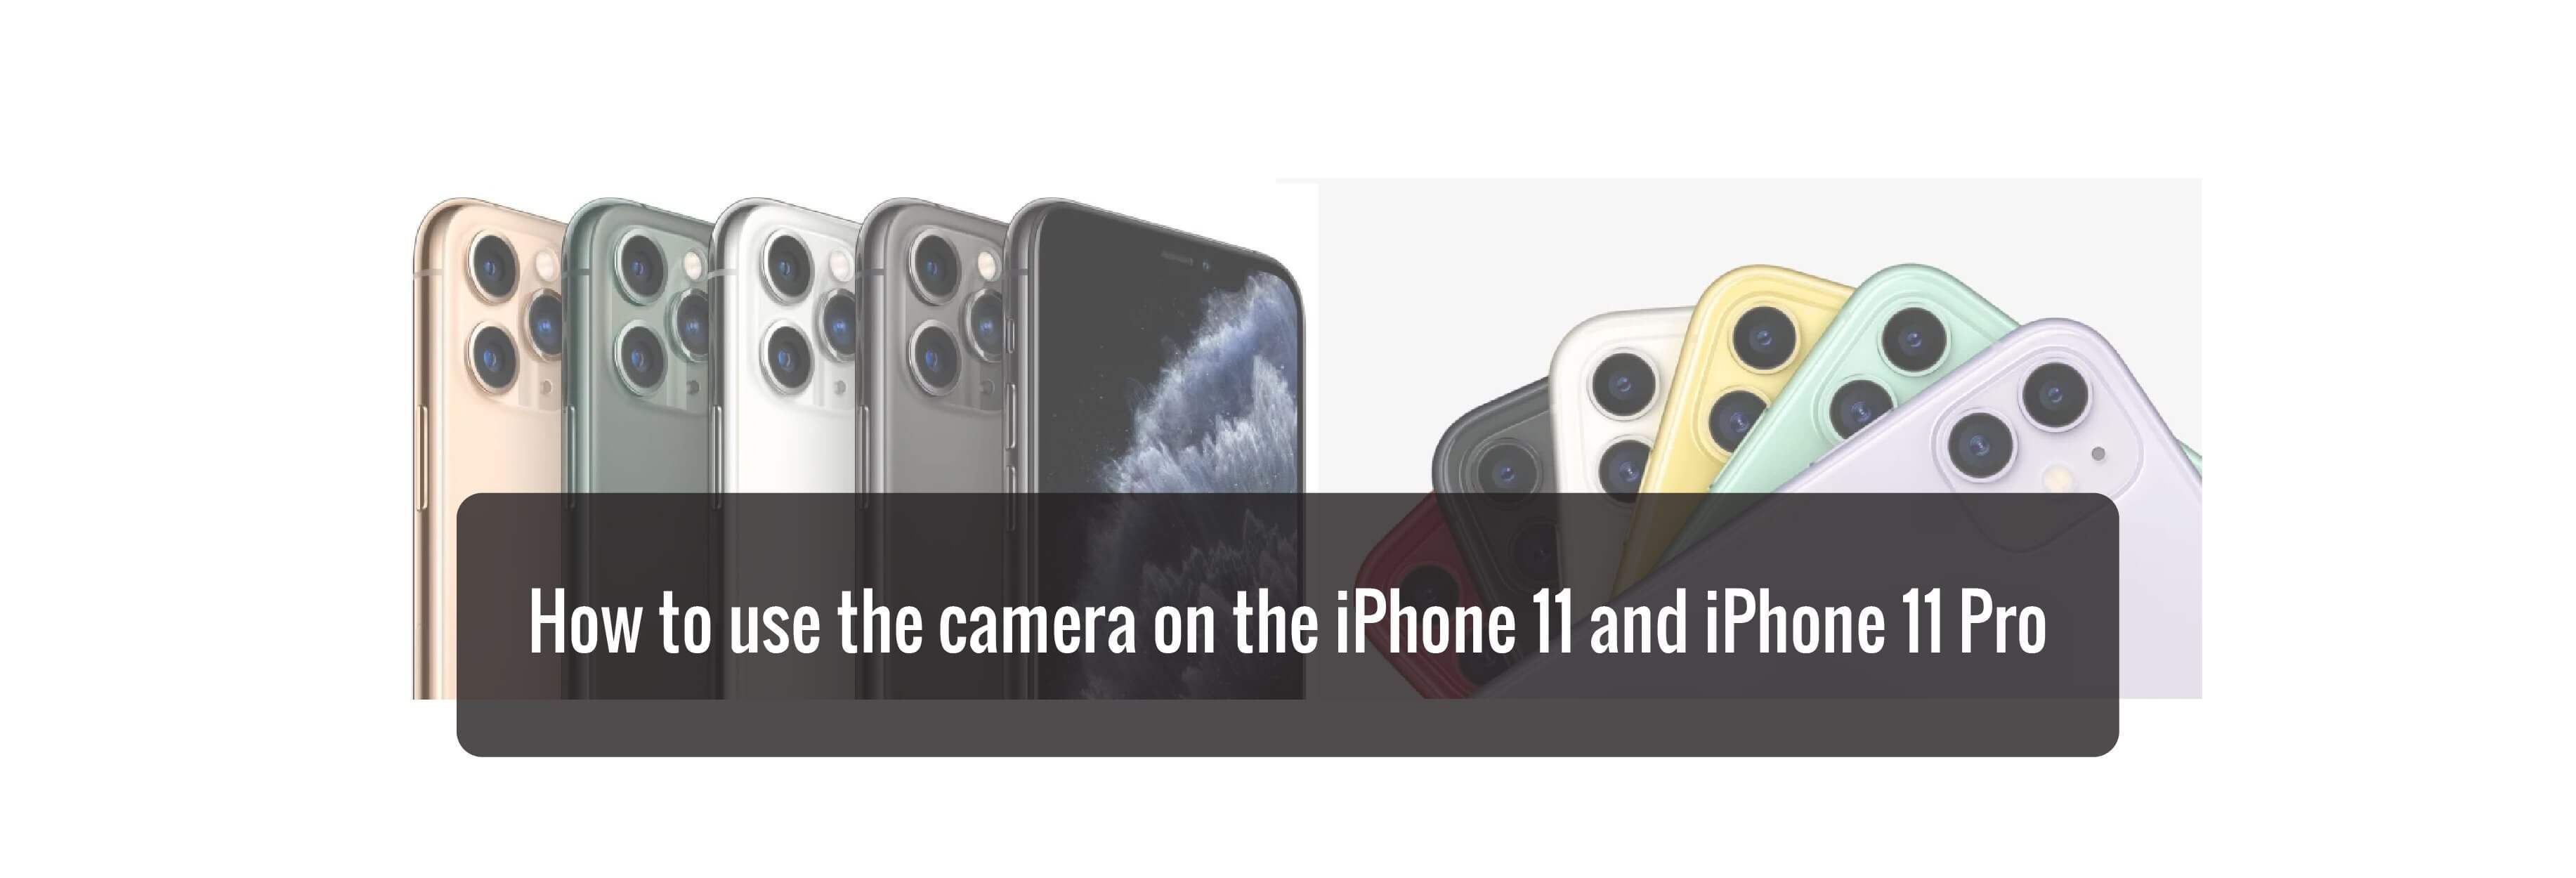 How to use the camera on the iPhone 11 and iPhone 11 Pro